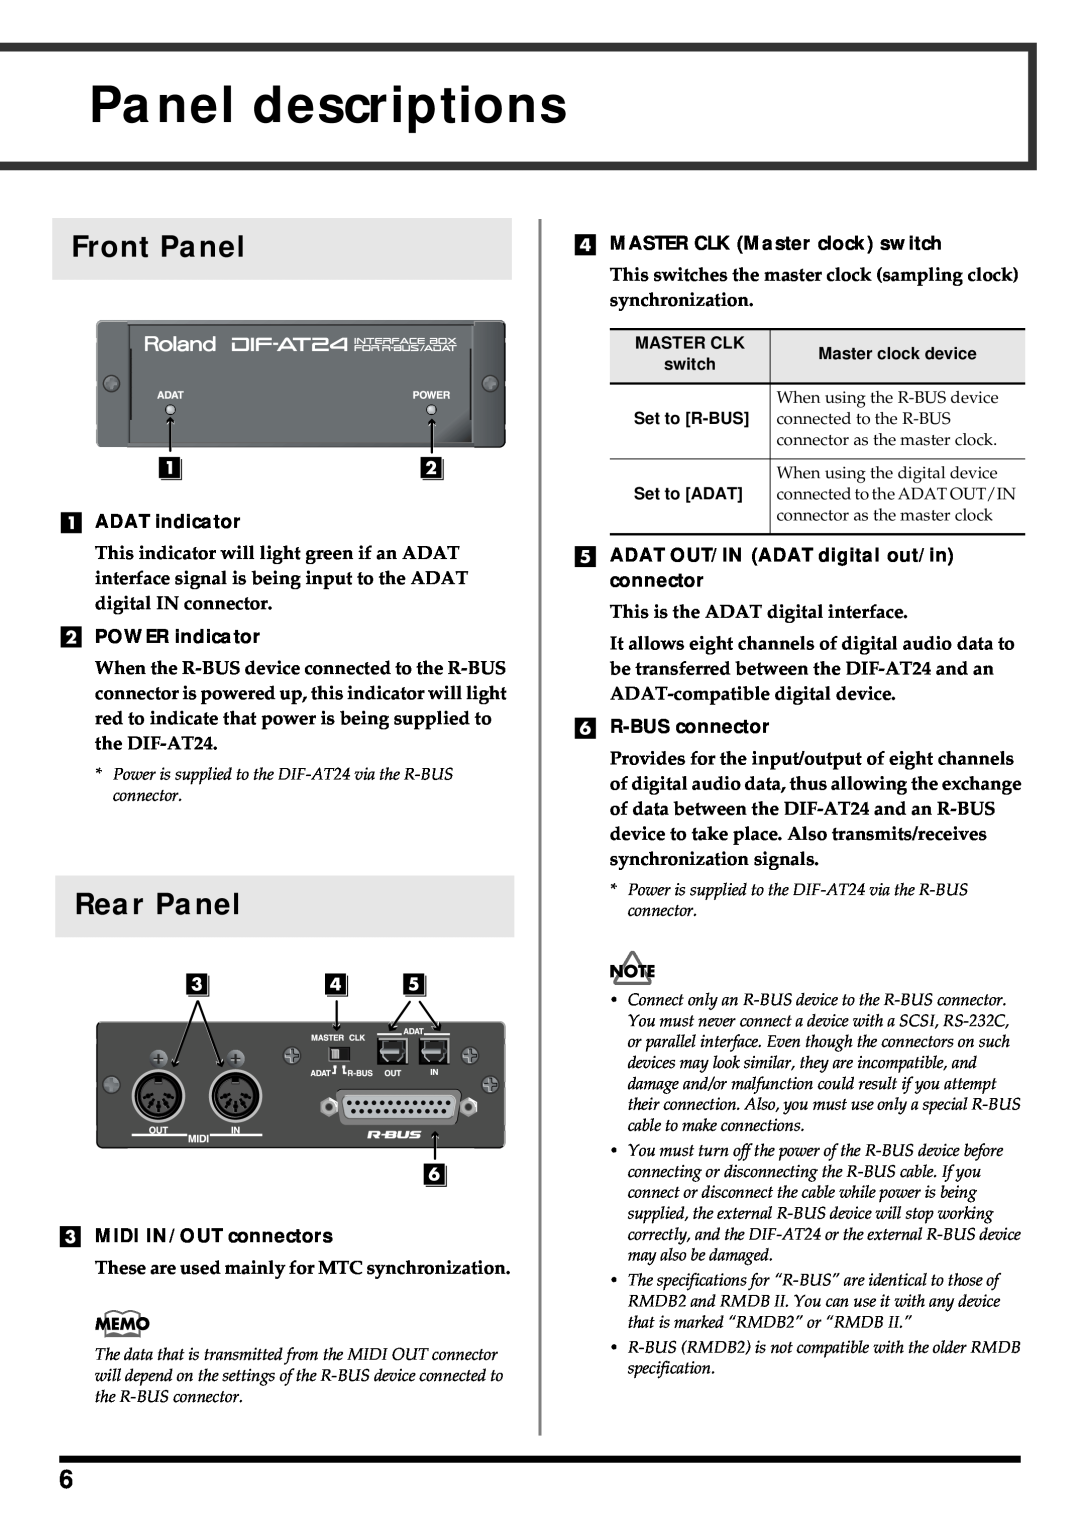 Roland DIF-AT24 Panel descriptions, Front Panel, Rear Panel, ADAT indicator, POWER indicator, MIDI IN/OUT connectors 